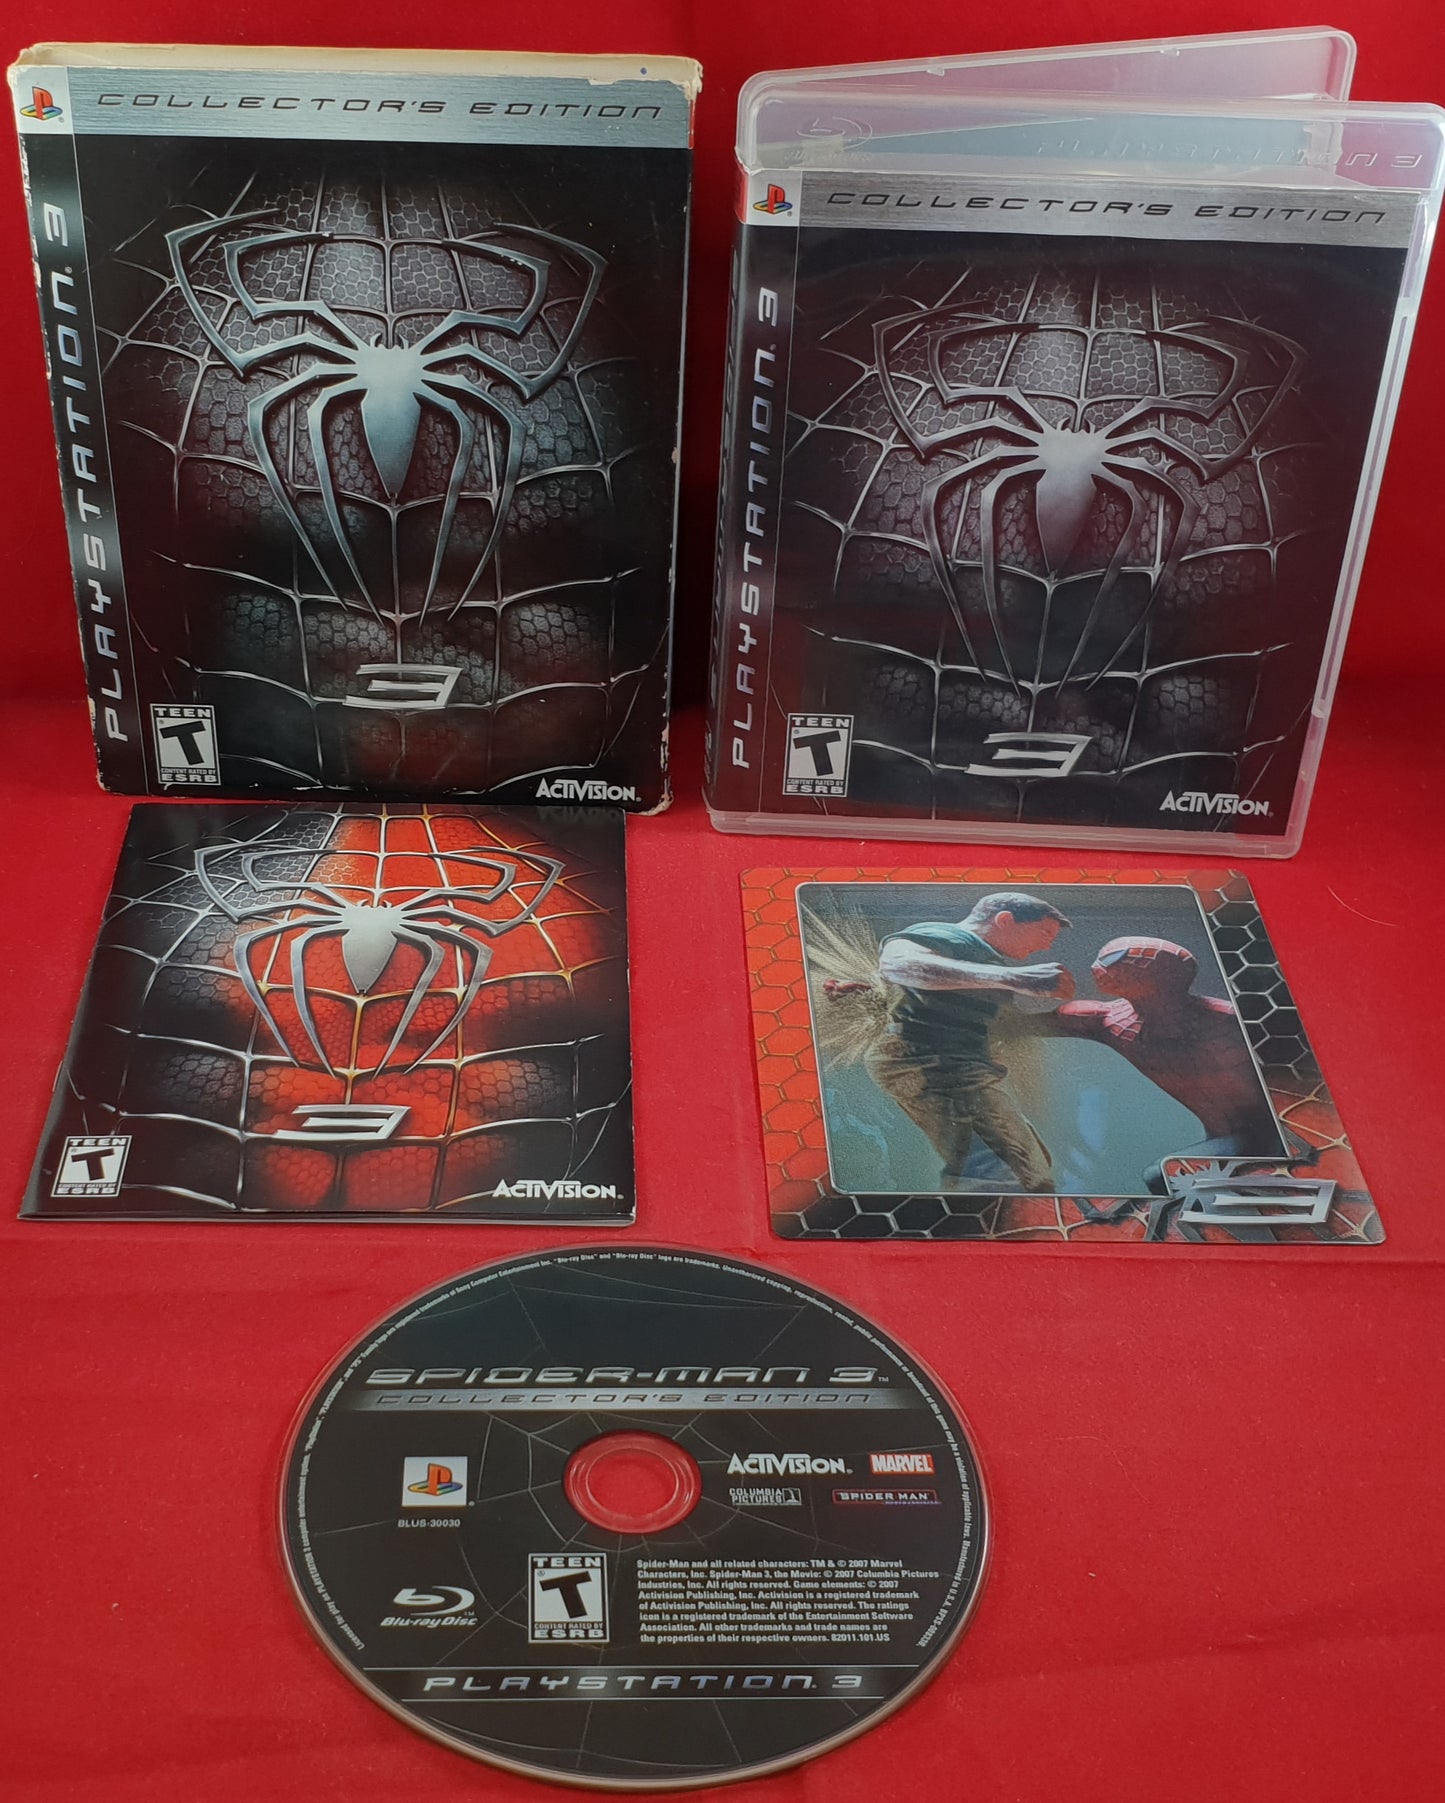 Spider-Man 3 Collector's Edition with Holographic Card Sony Playstation 3 (PS3) Game